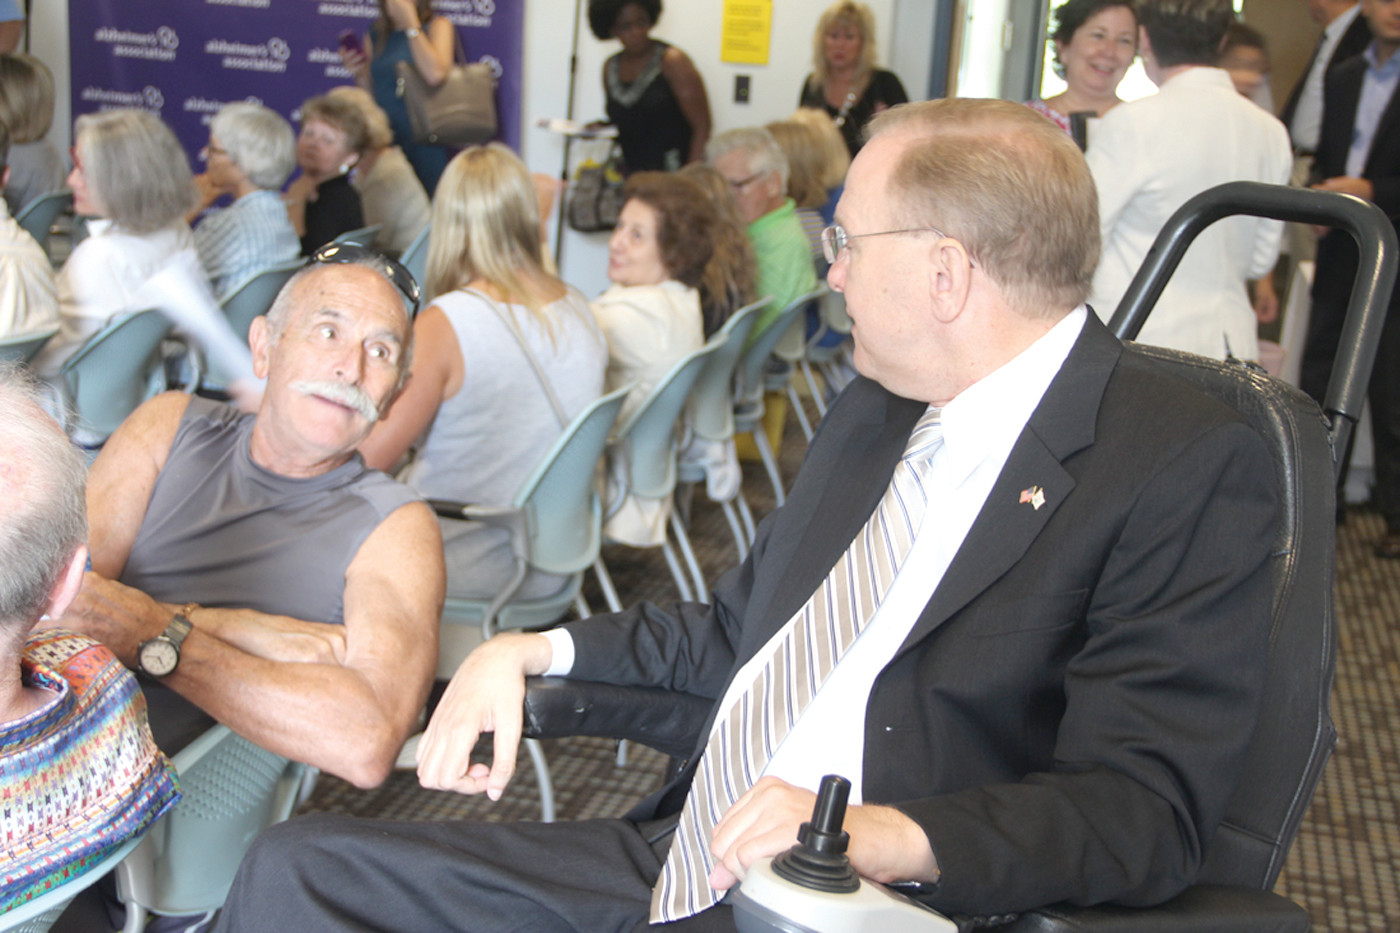 HEARING HIS STORY: Congressman Jim Langevin talks with Samuel Nash of East Greenwich who is a caregiver for his wife who has Alzheimer’s.